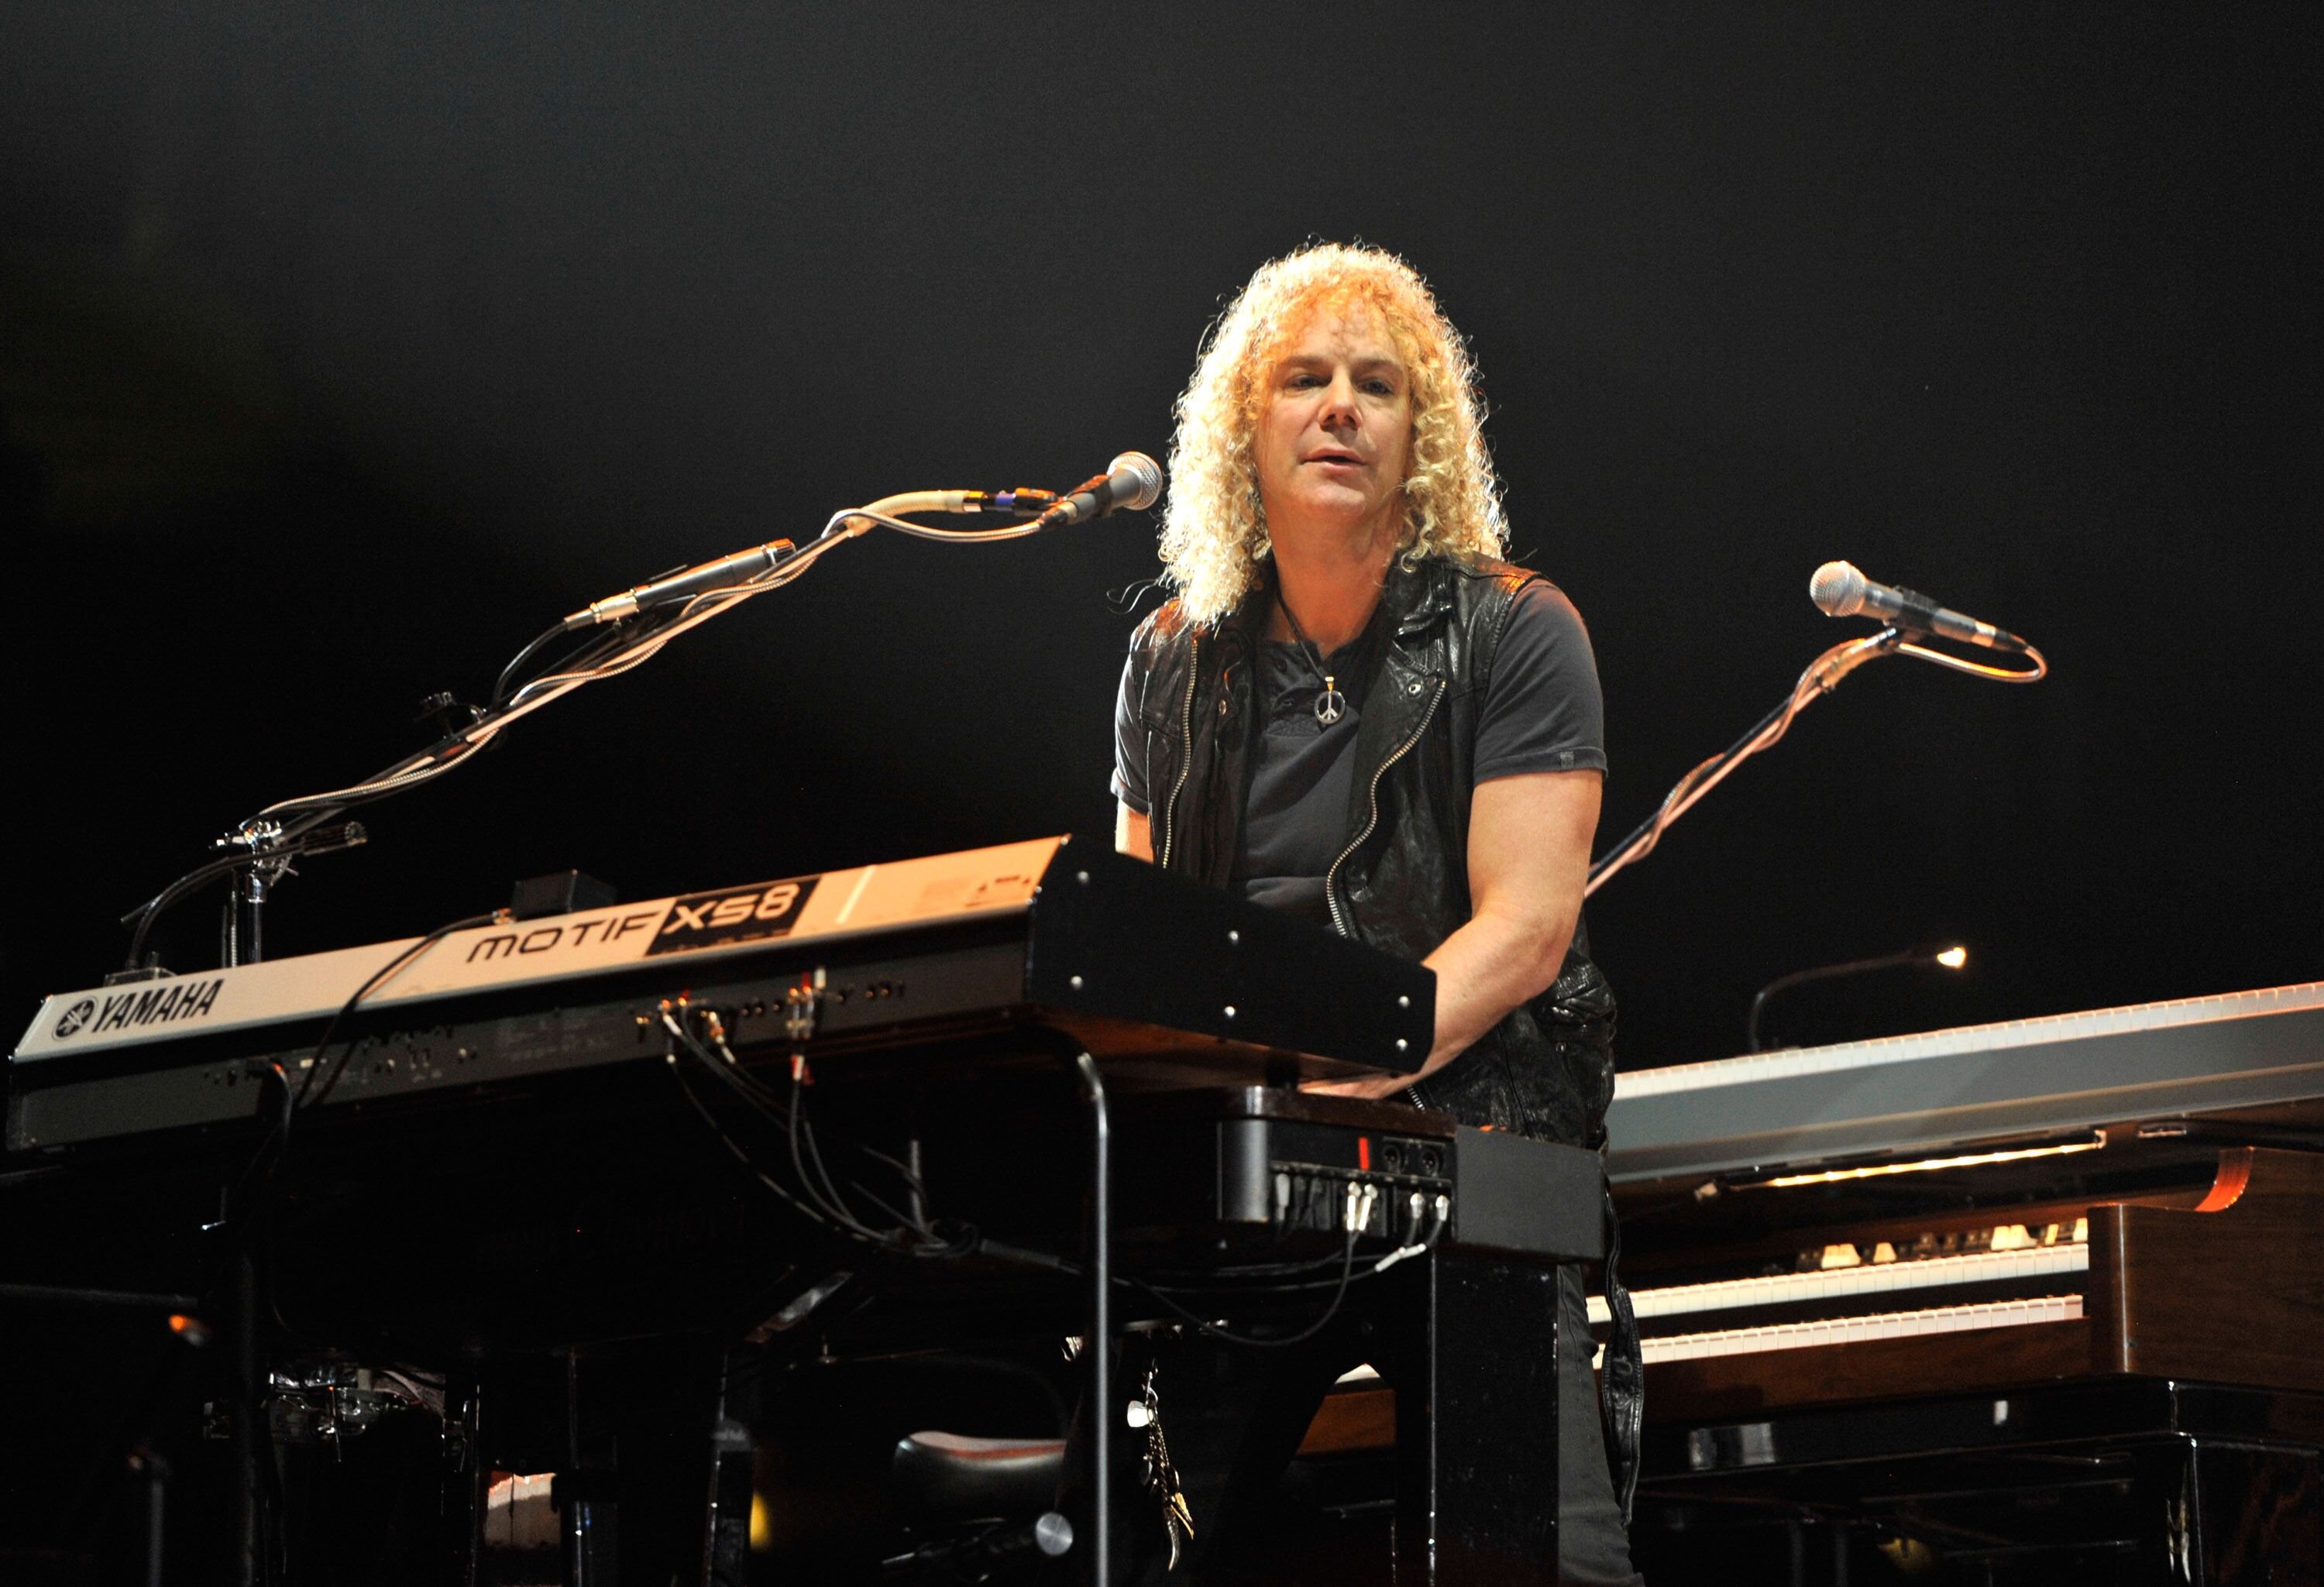 David Bryan of Bon Jovi performs at Nassau Veterans Memorial Coliseum on May 6, 2011, in Uniondale, New York | Photo: Kevin Mazur/WireImage/Getty Images